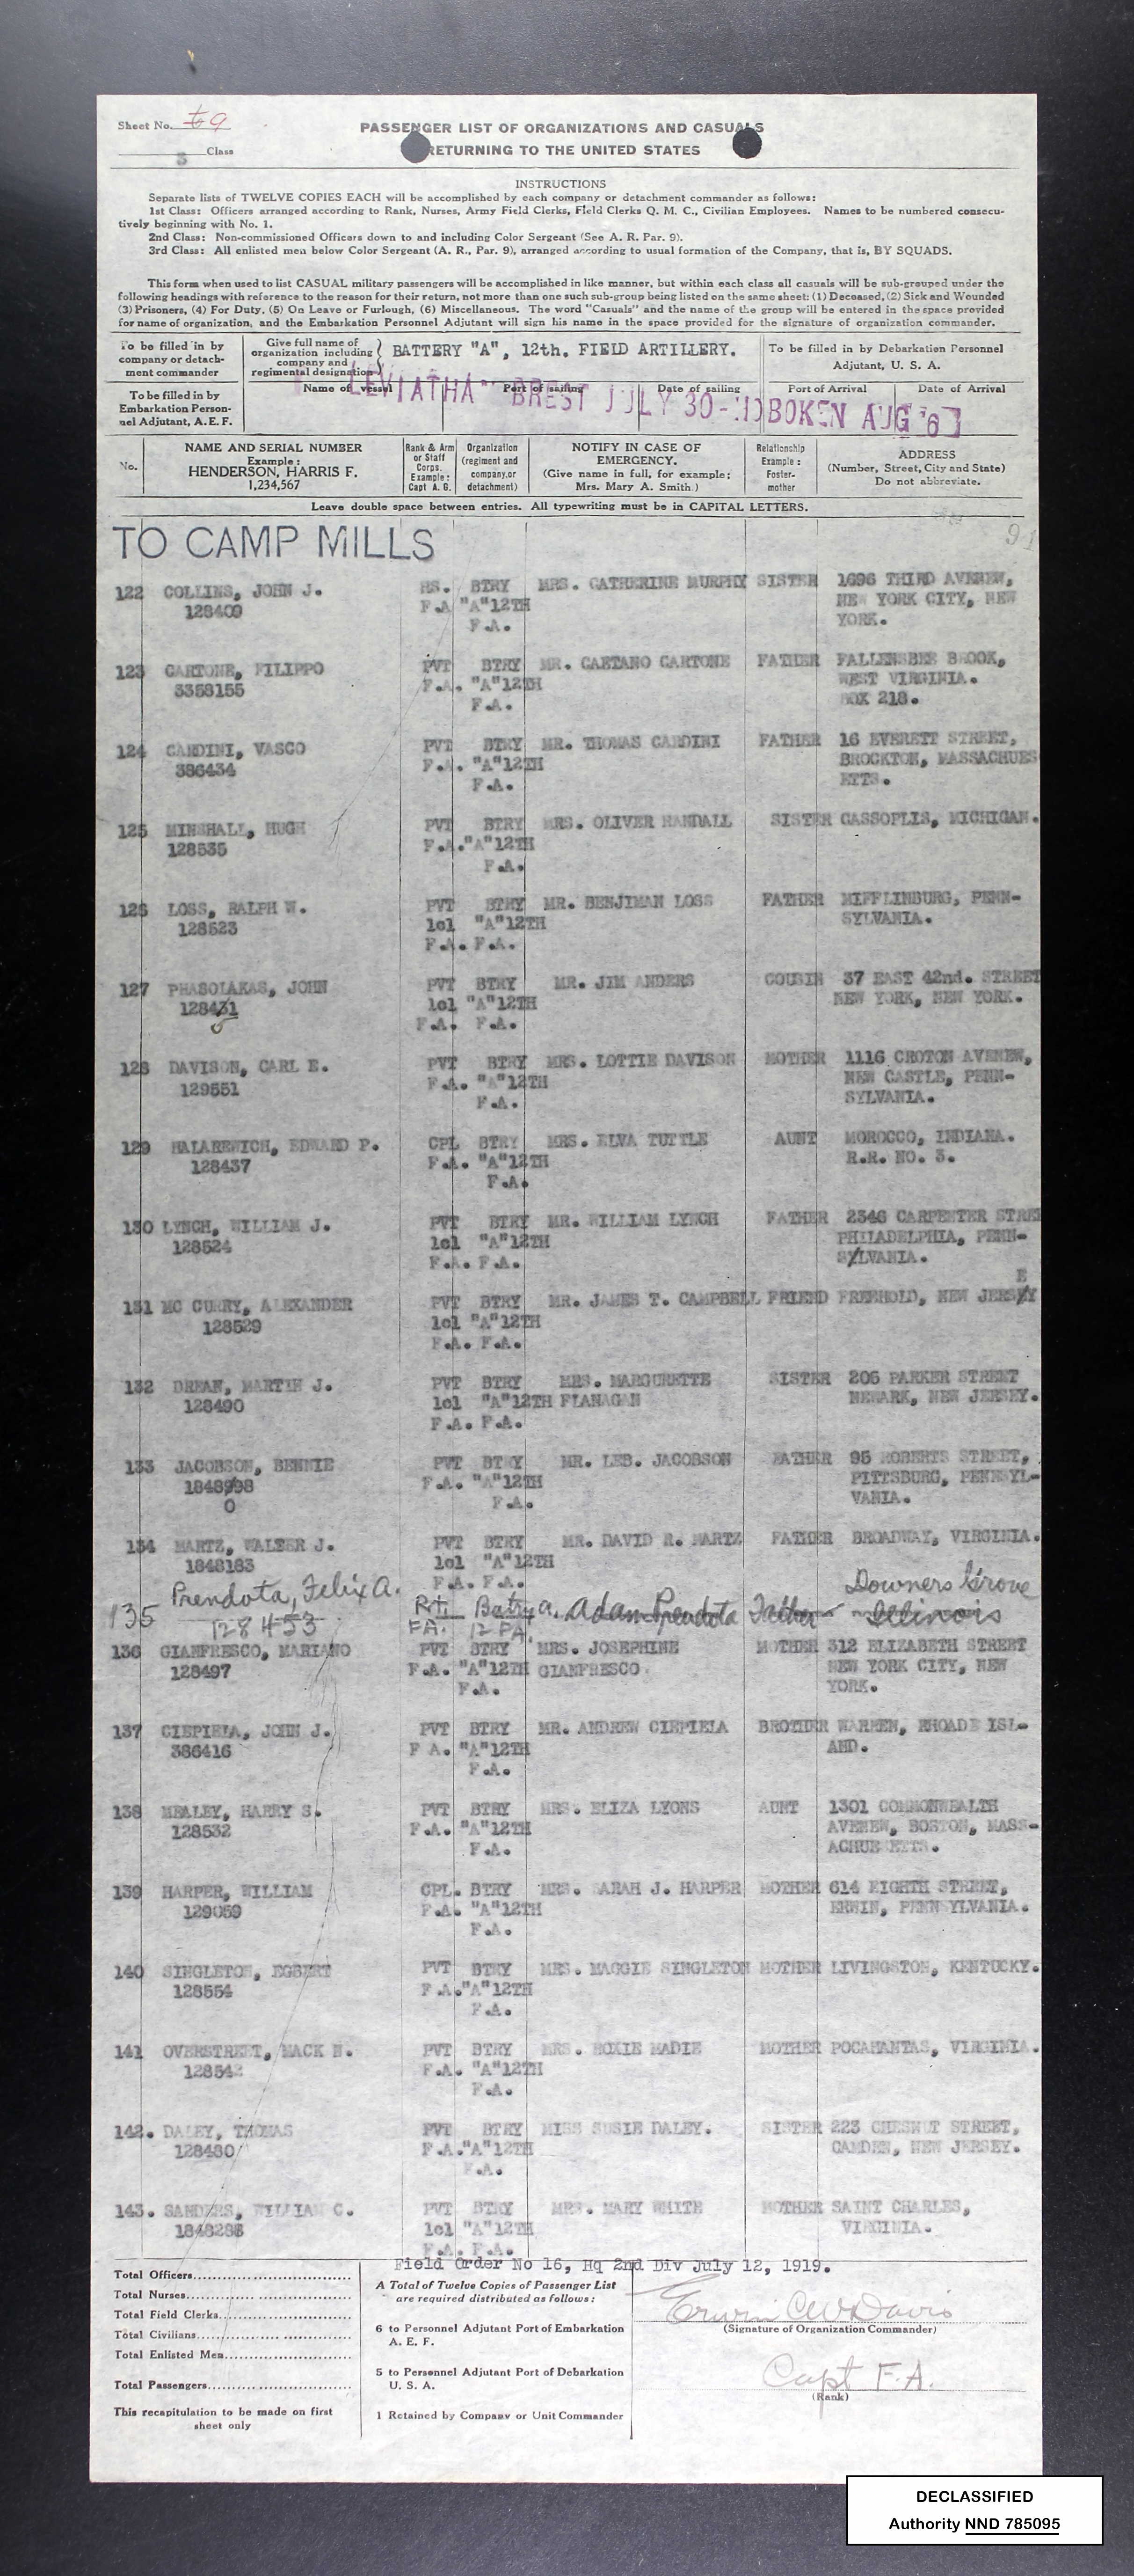 Passenger List of Organizations and Casuals Returning to the United ...